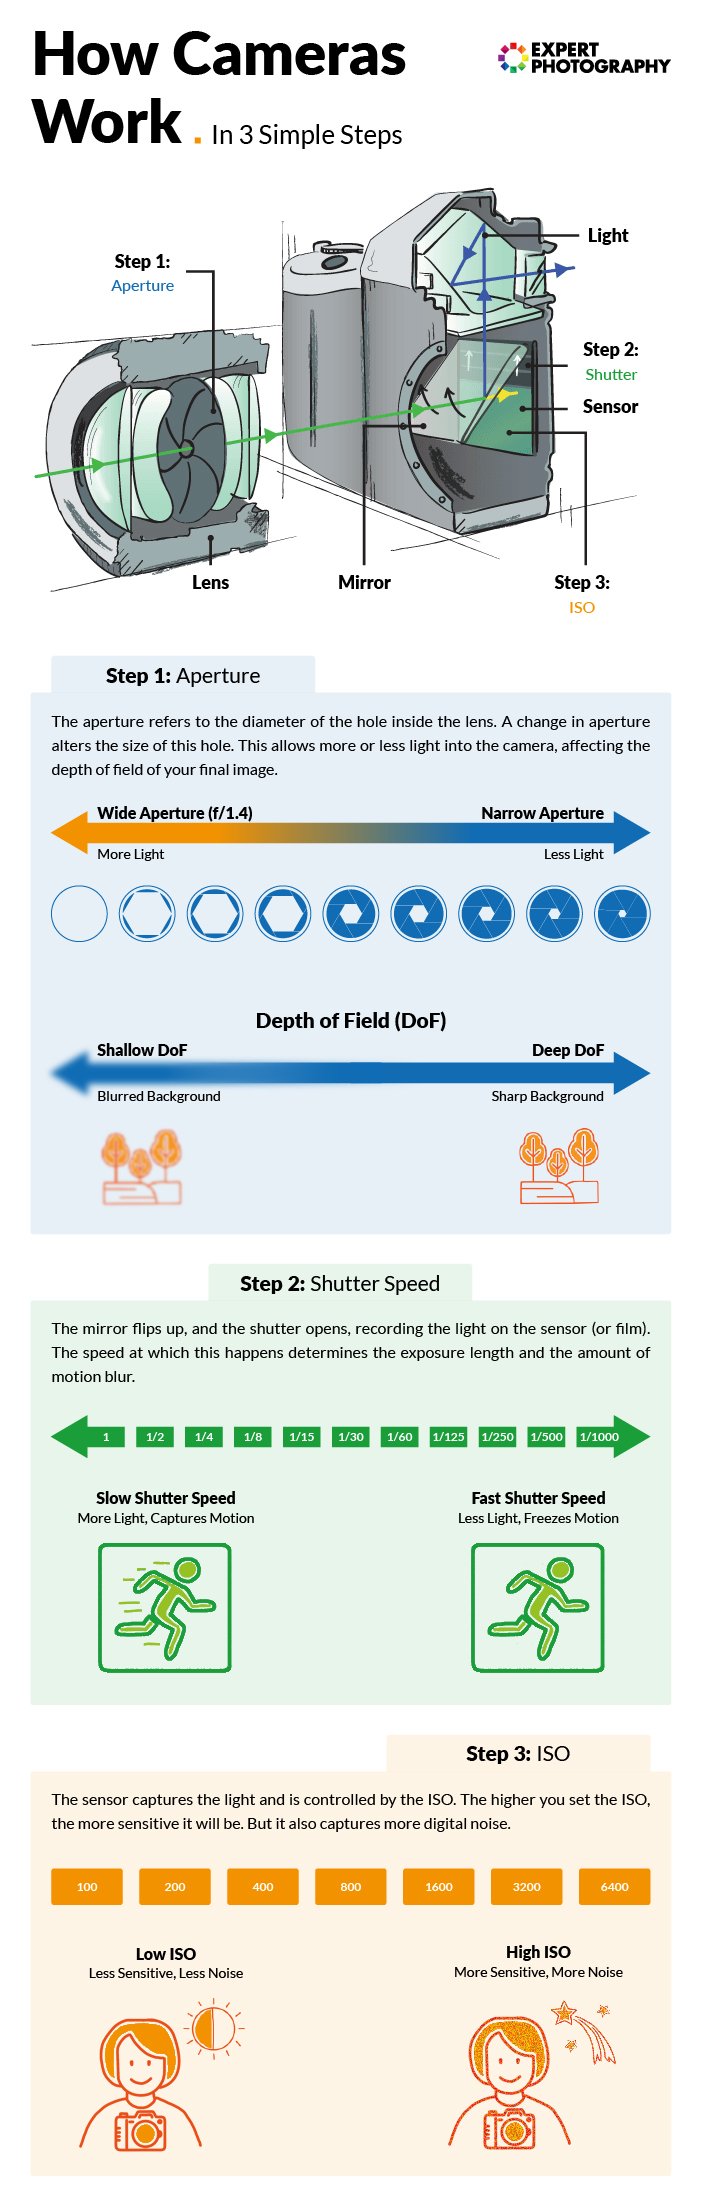 An infographic for how cameras work in regards to aperture shutter speed and ISO